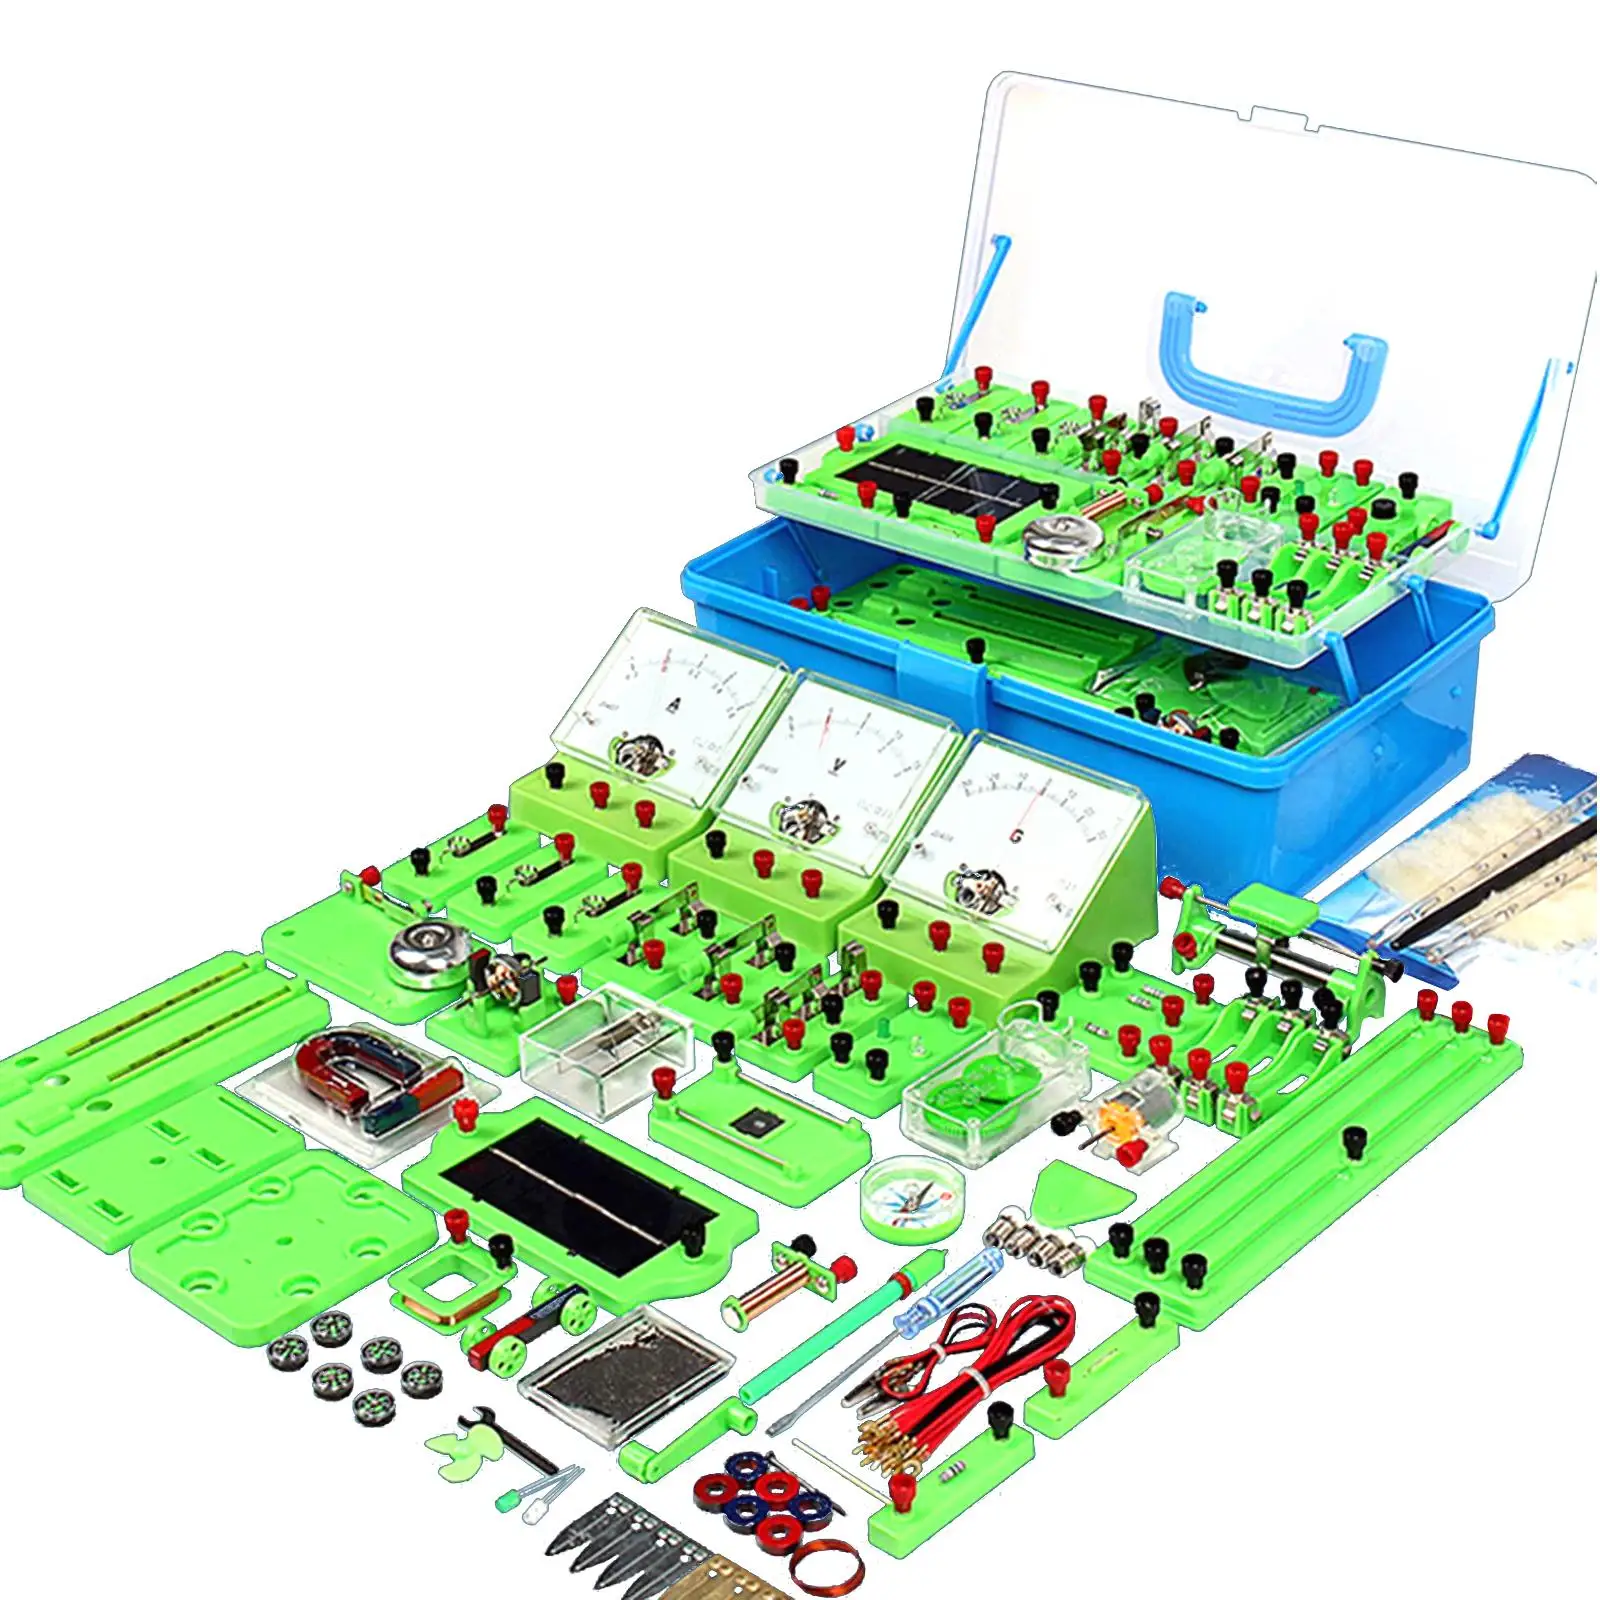 Electricity and Magnetism Kit Electricity Discovery Circuit Learning Kits Physics Basic Circuit Board Kit for Students Classroom